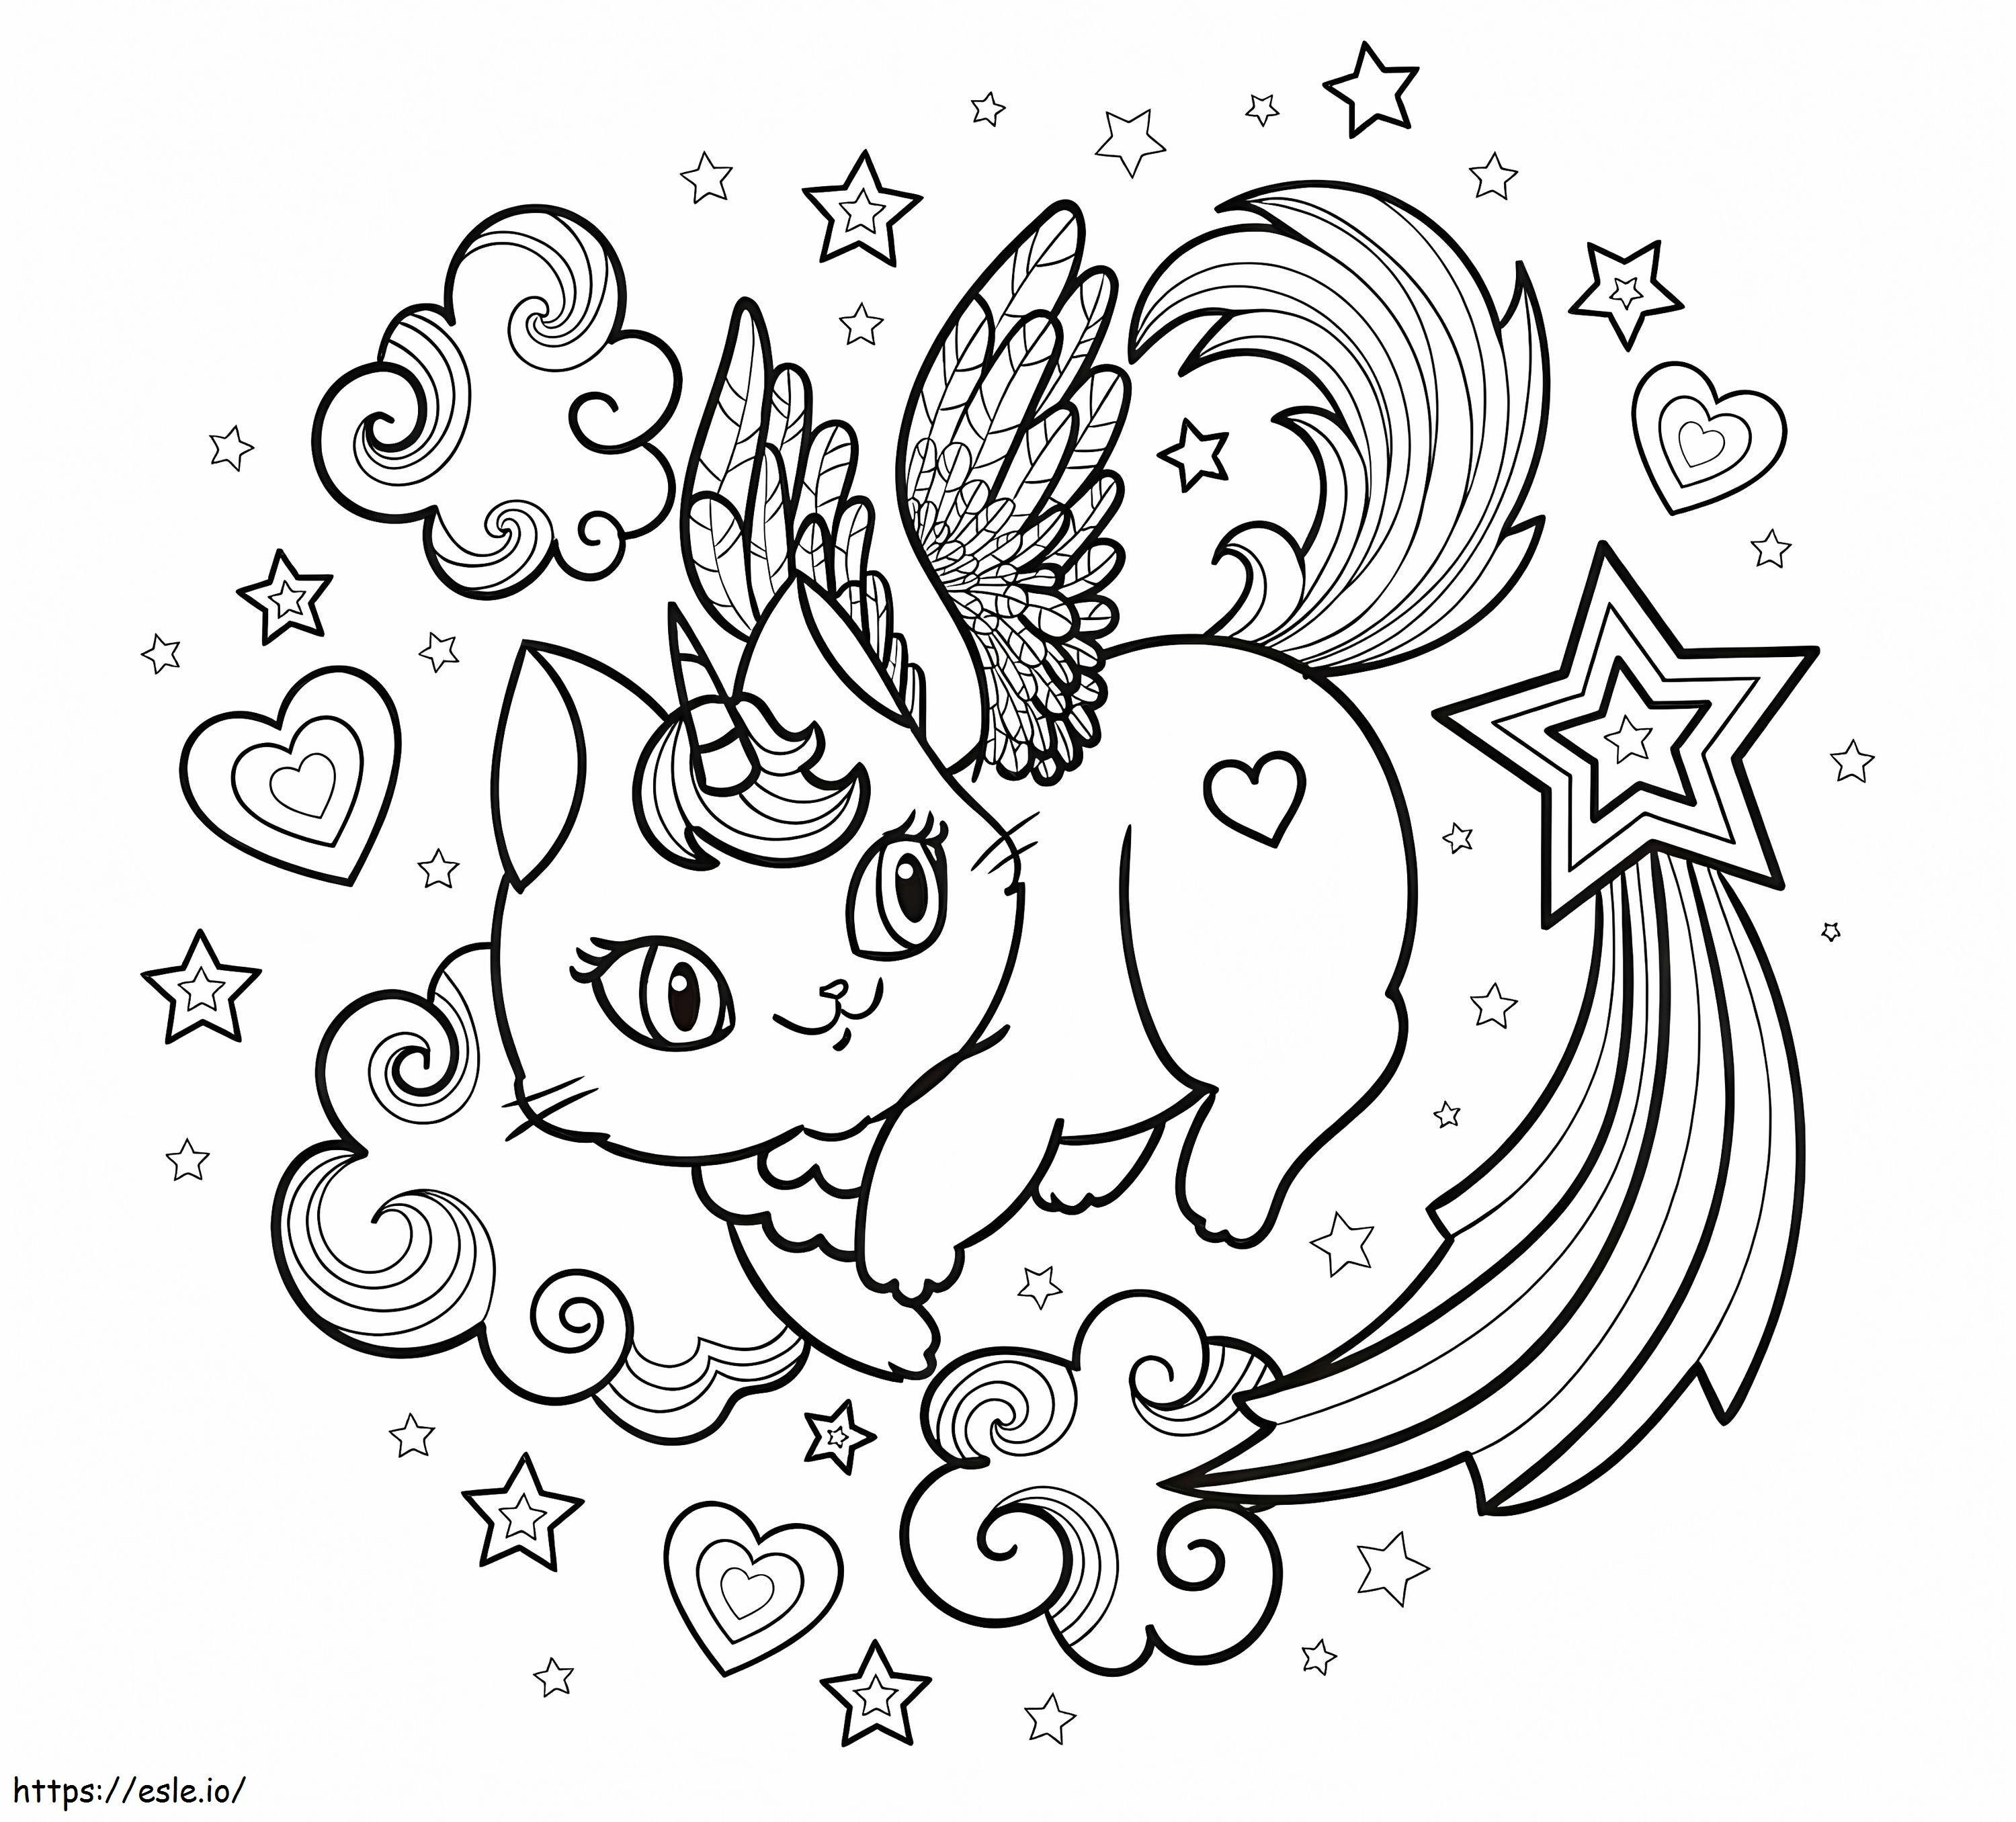 Awesome Unicorn Cat coloring page